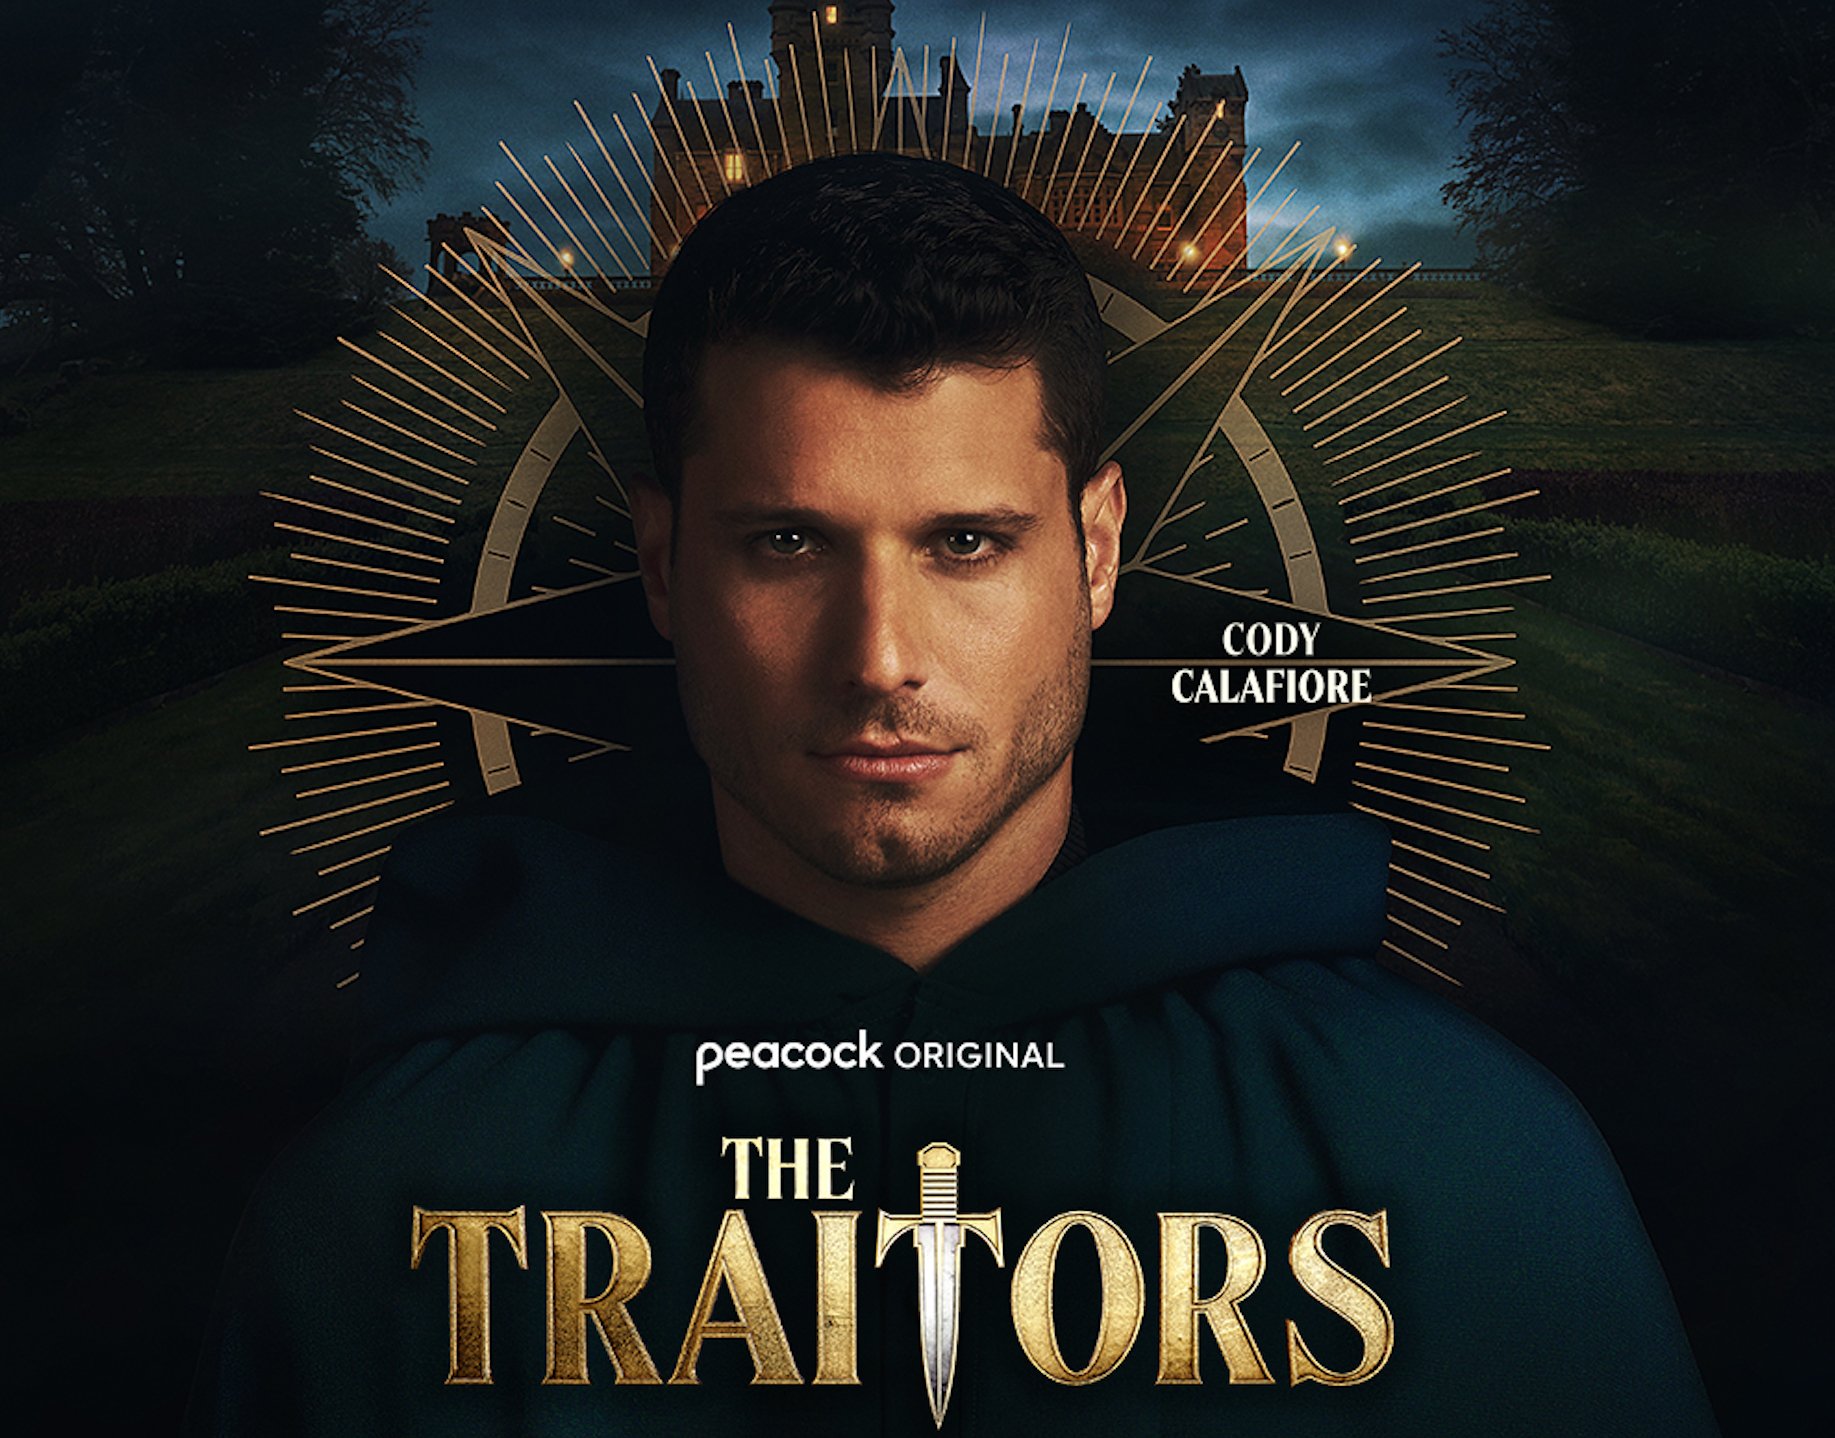 Is ‘The Traitors’ Harder Than ‘Big Brother’? Cody Calafiore Breaks Down Crying